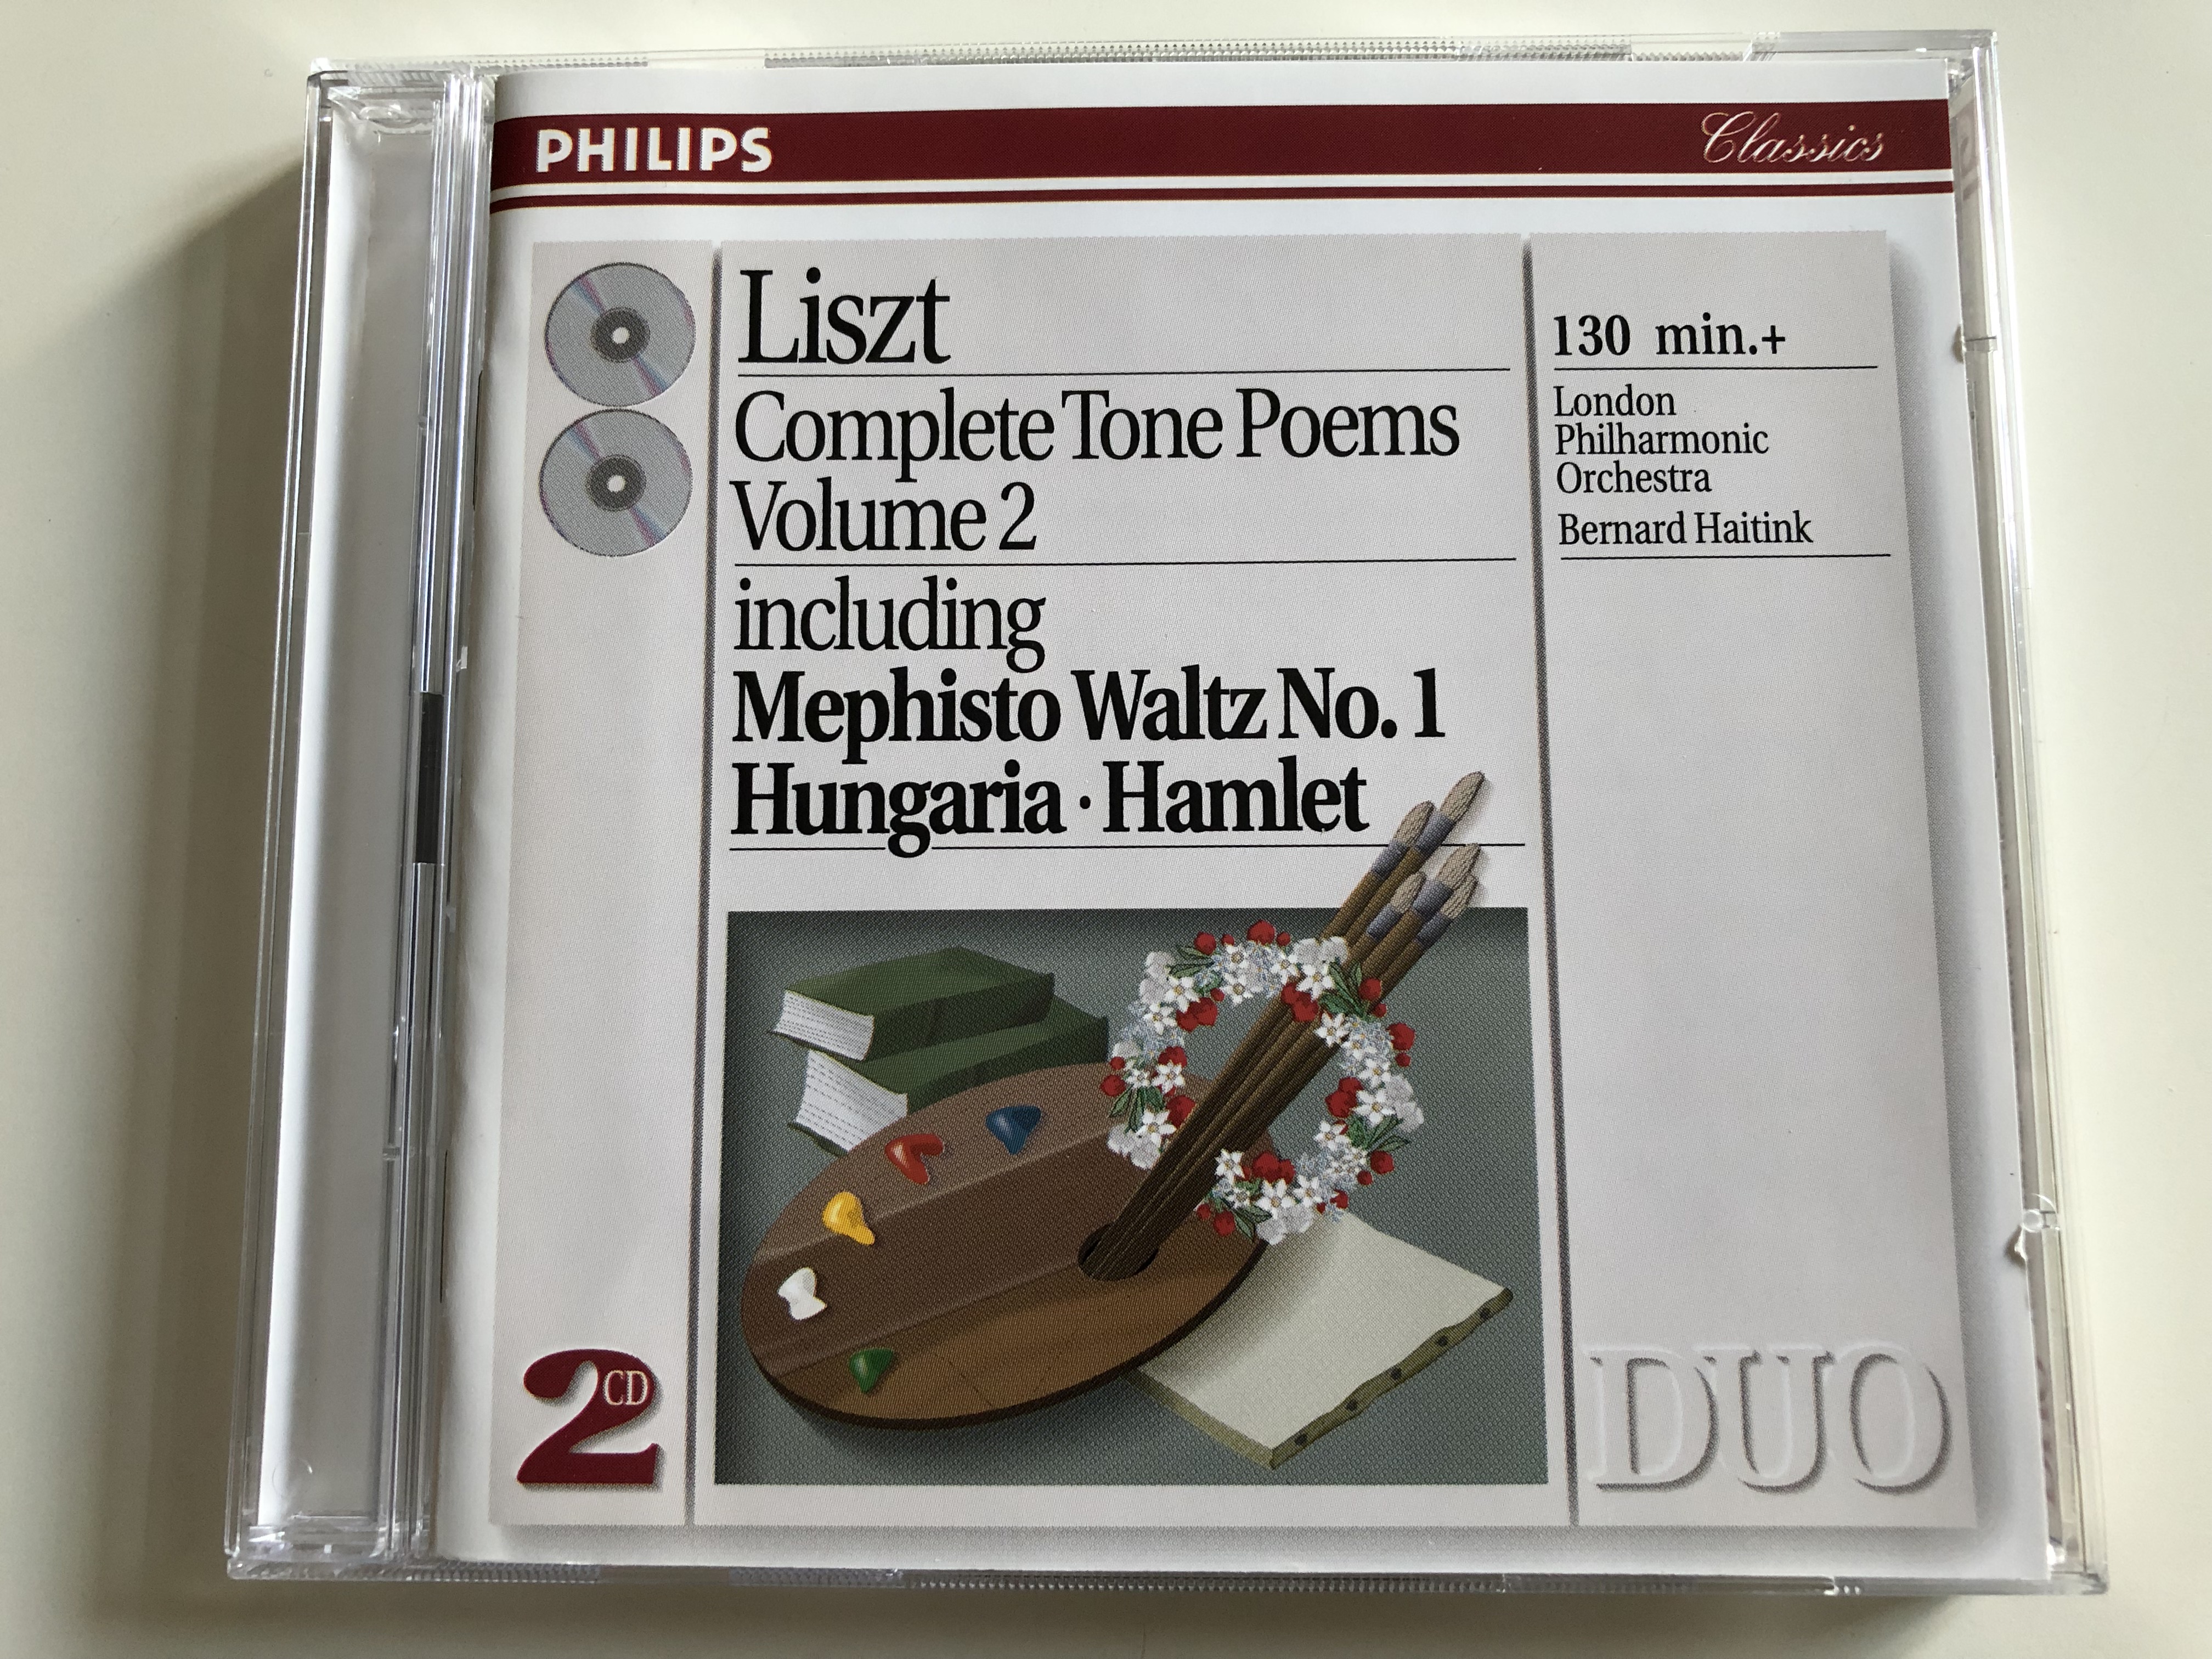 -liszt-complete-tone-poems-volume-2-including-mephisto-waltz-no.-1-hungaria-hamlet-london-philharmonic-orchestra-conducted-by-bernard-haitink-philips-classics-2-cd-1993-438-754-2-1-.jpg